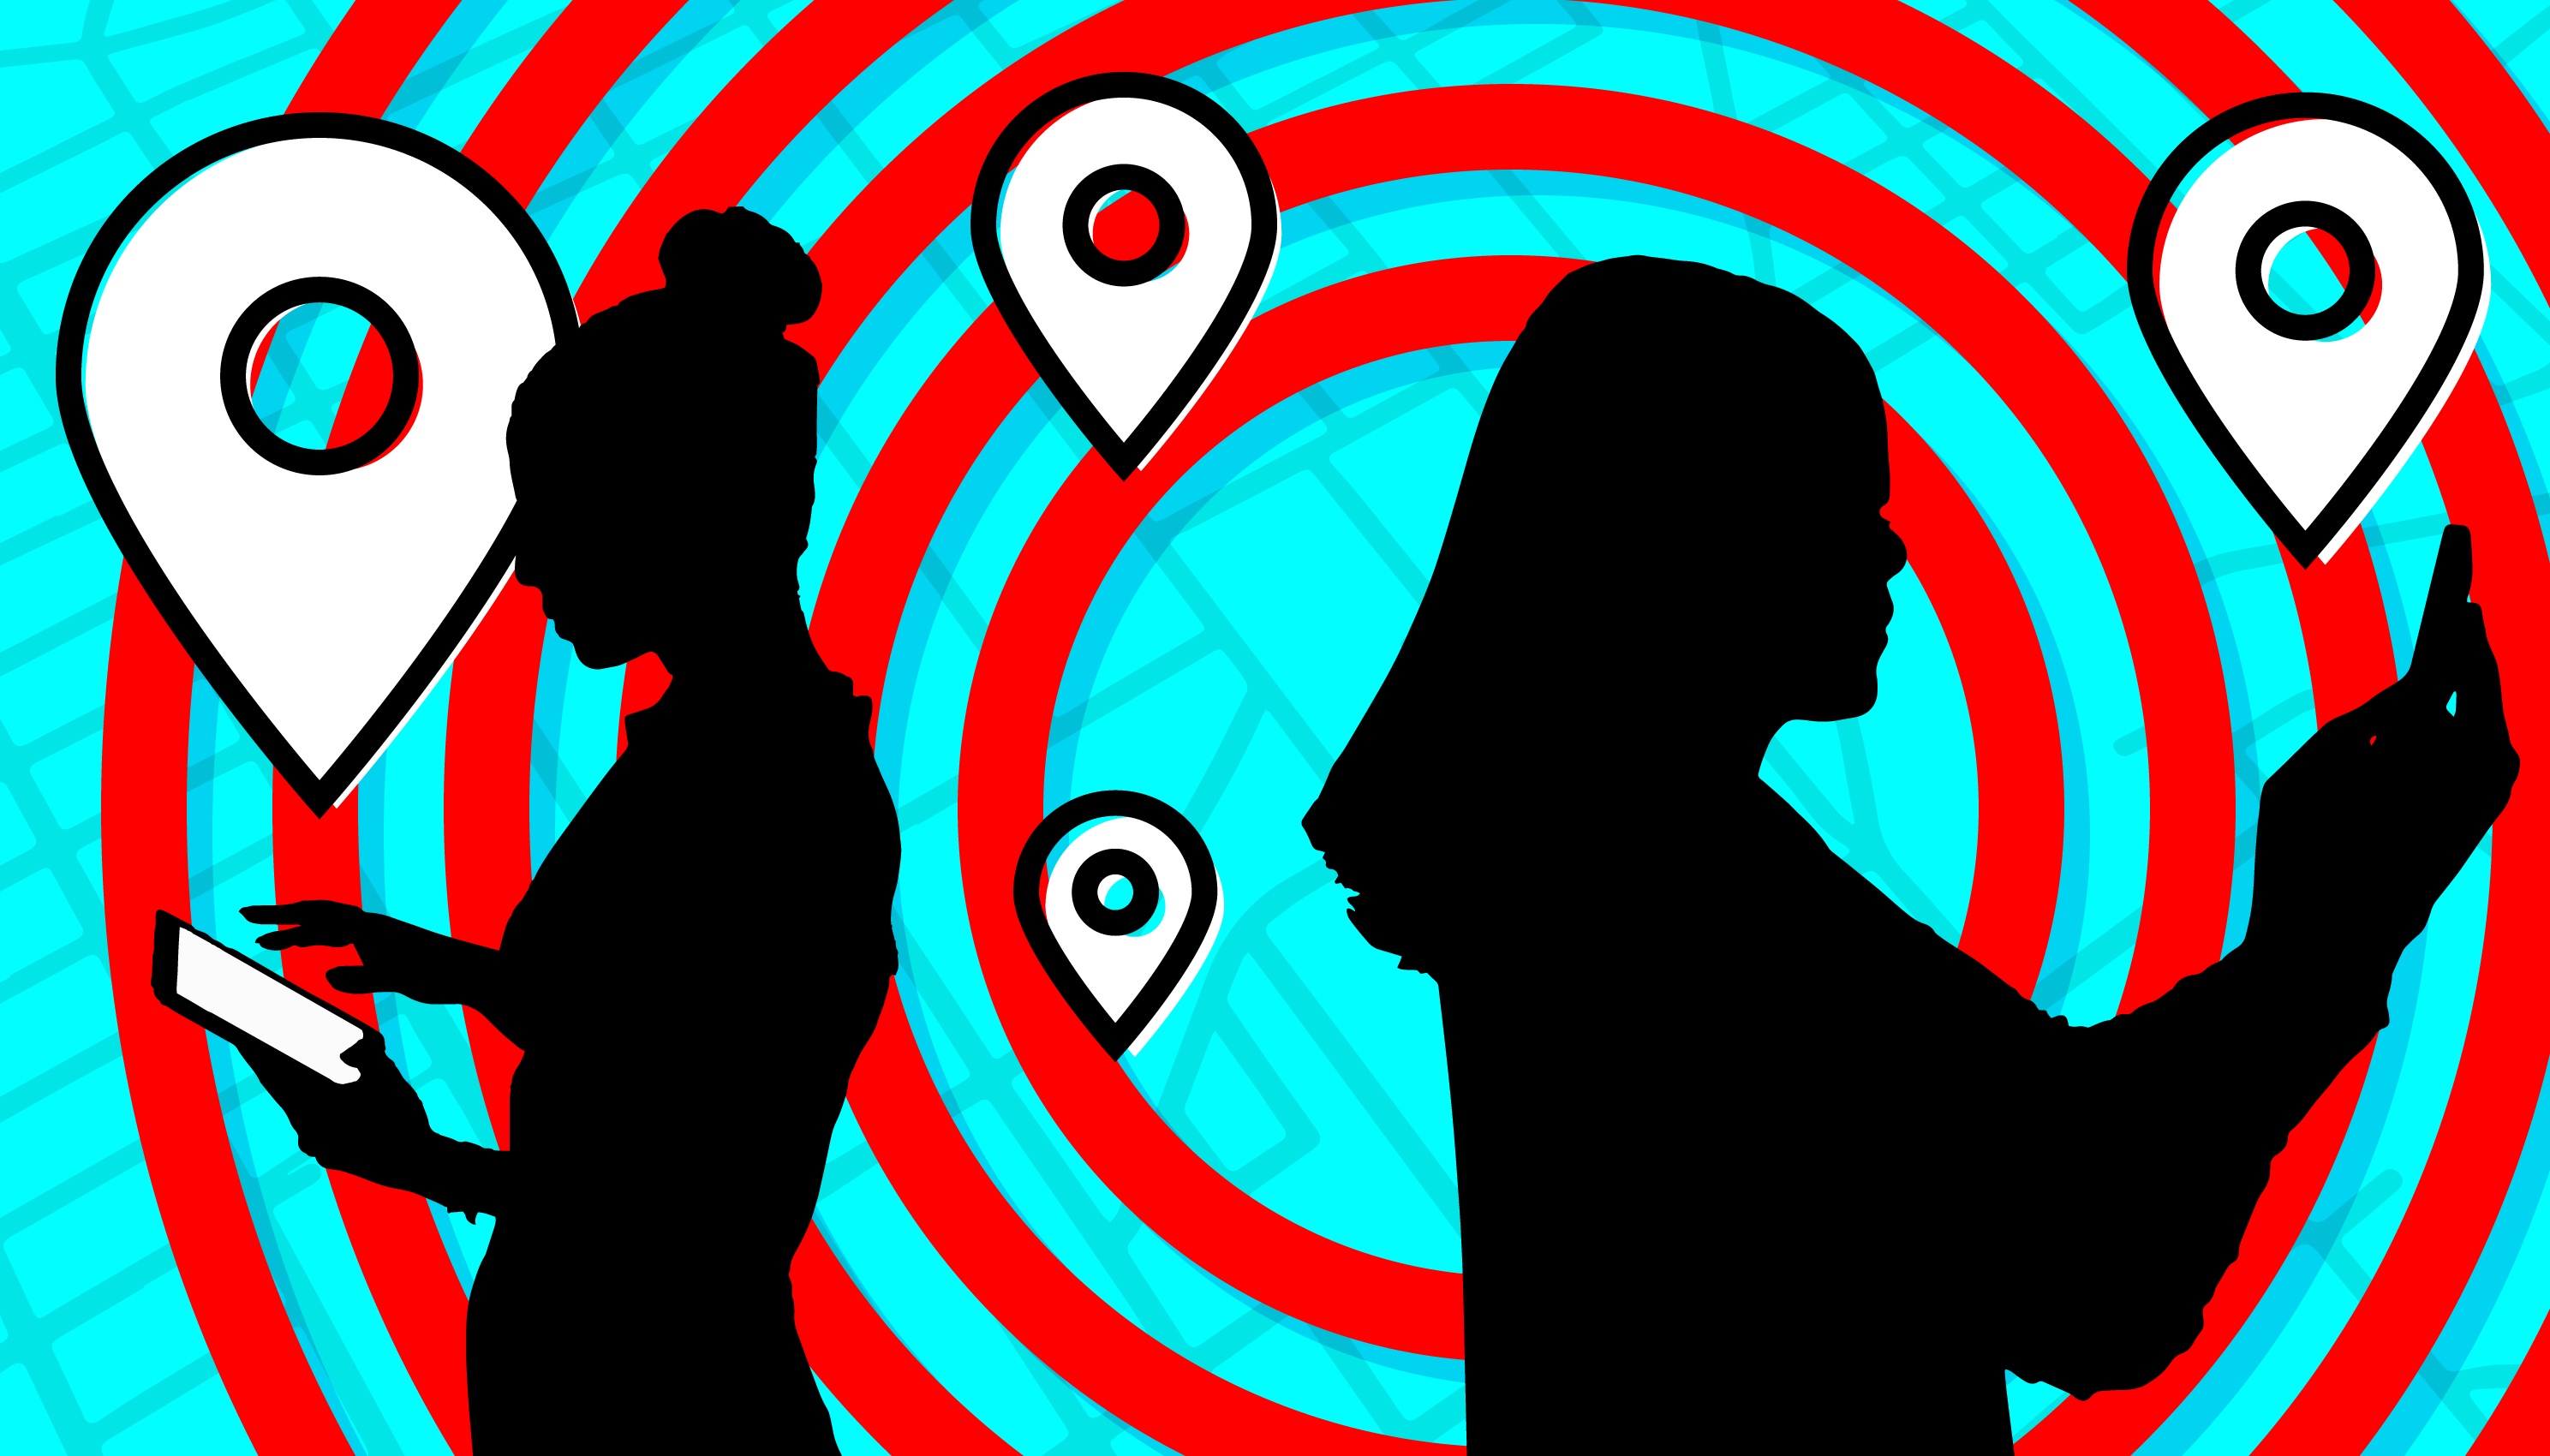 two figures using phones amidst location pins on a map